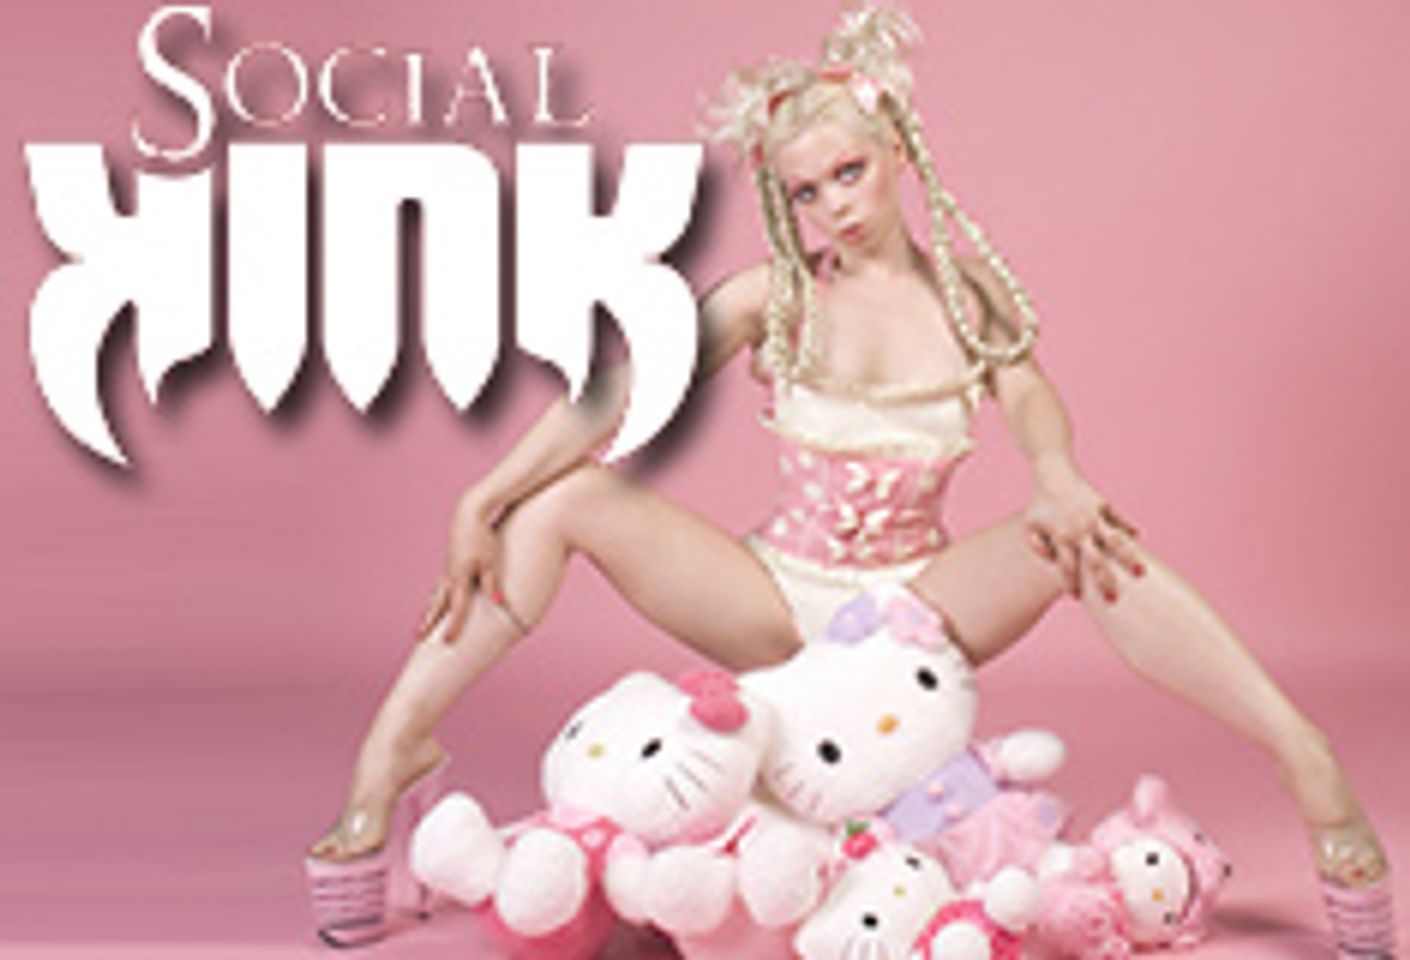 Fetish-Community Site Social Kink Launches